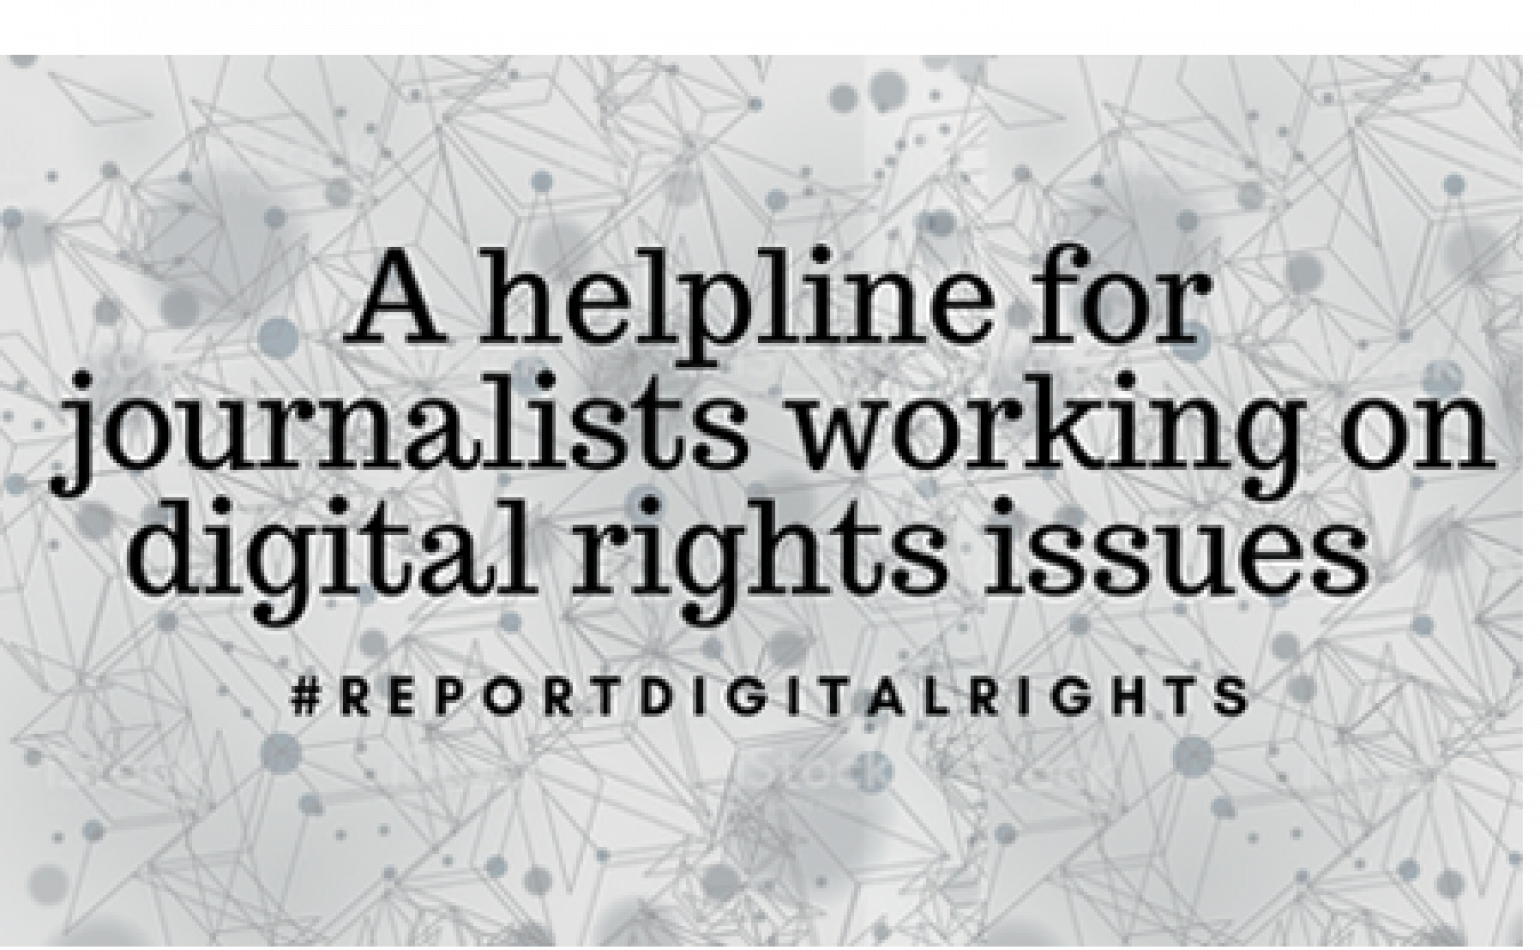 Are you a journalist working a digital rights story on deadline? Have a question that you need quickly answered? Get in touch. We are happy to help!